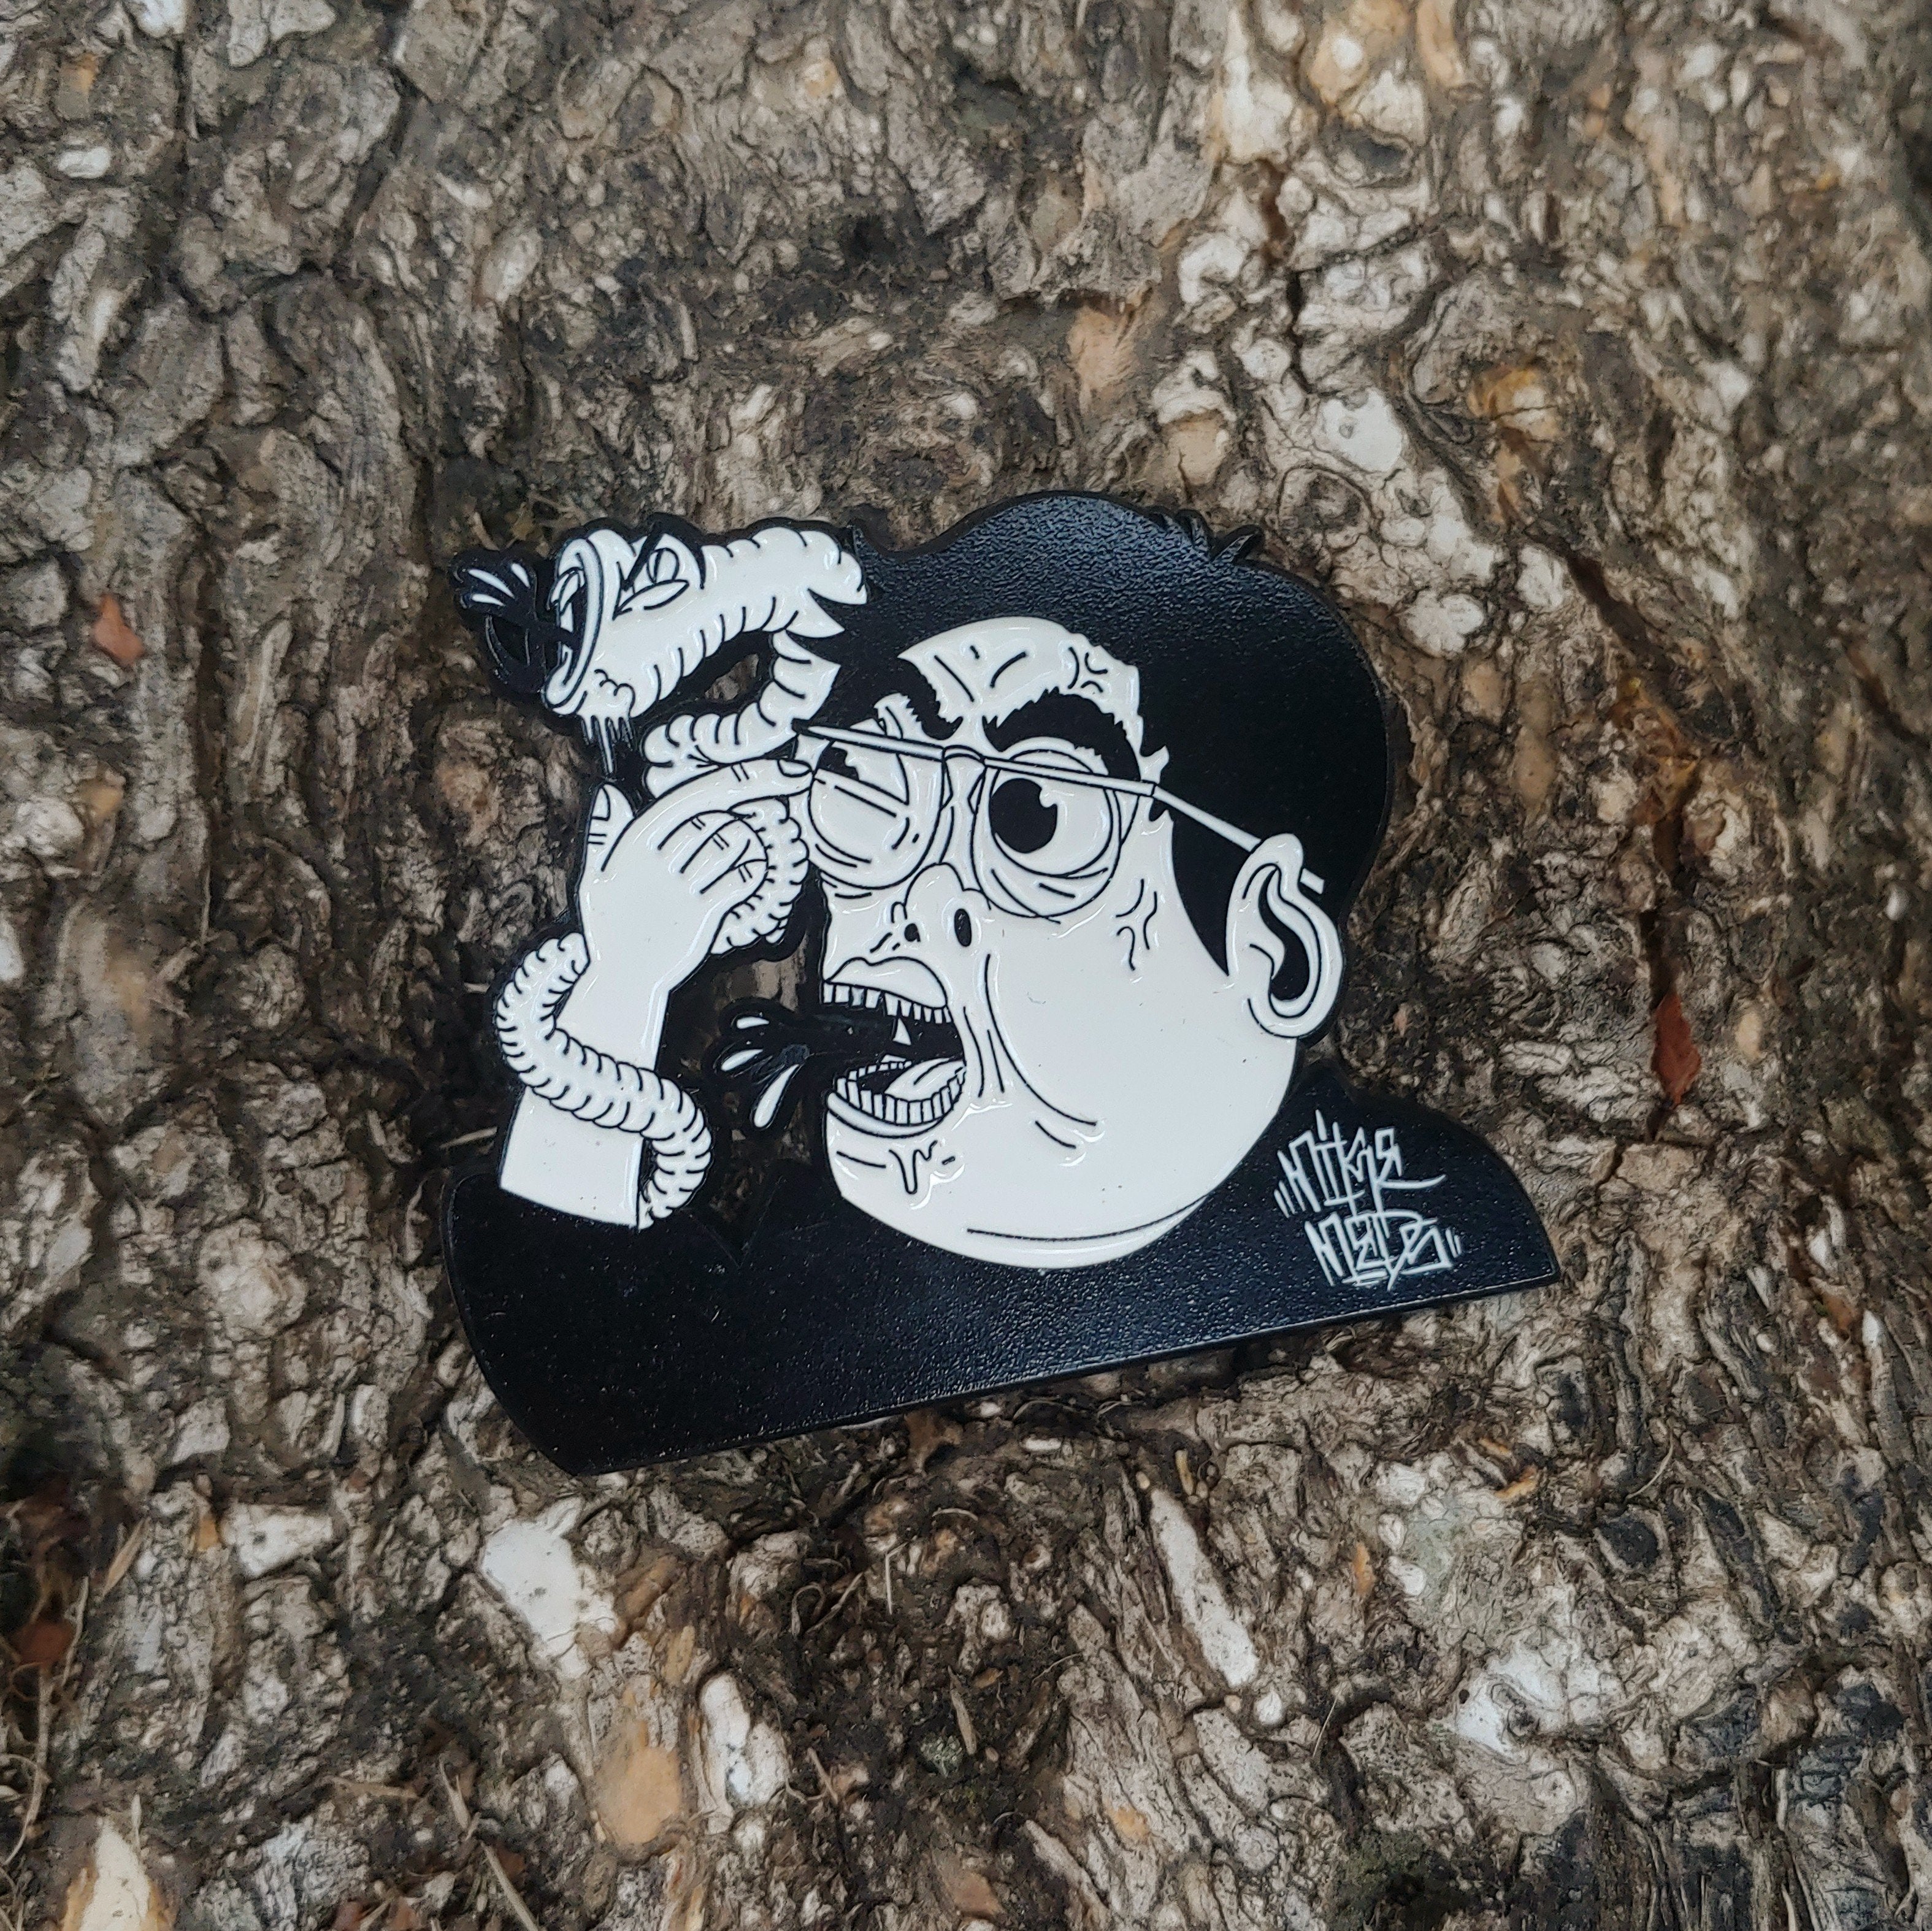 Look At It Closely - Pin Plugged x Mike Meds collab pin - Pin Plugged